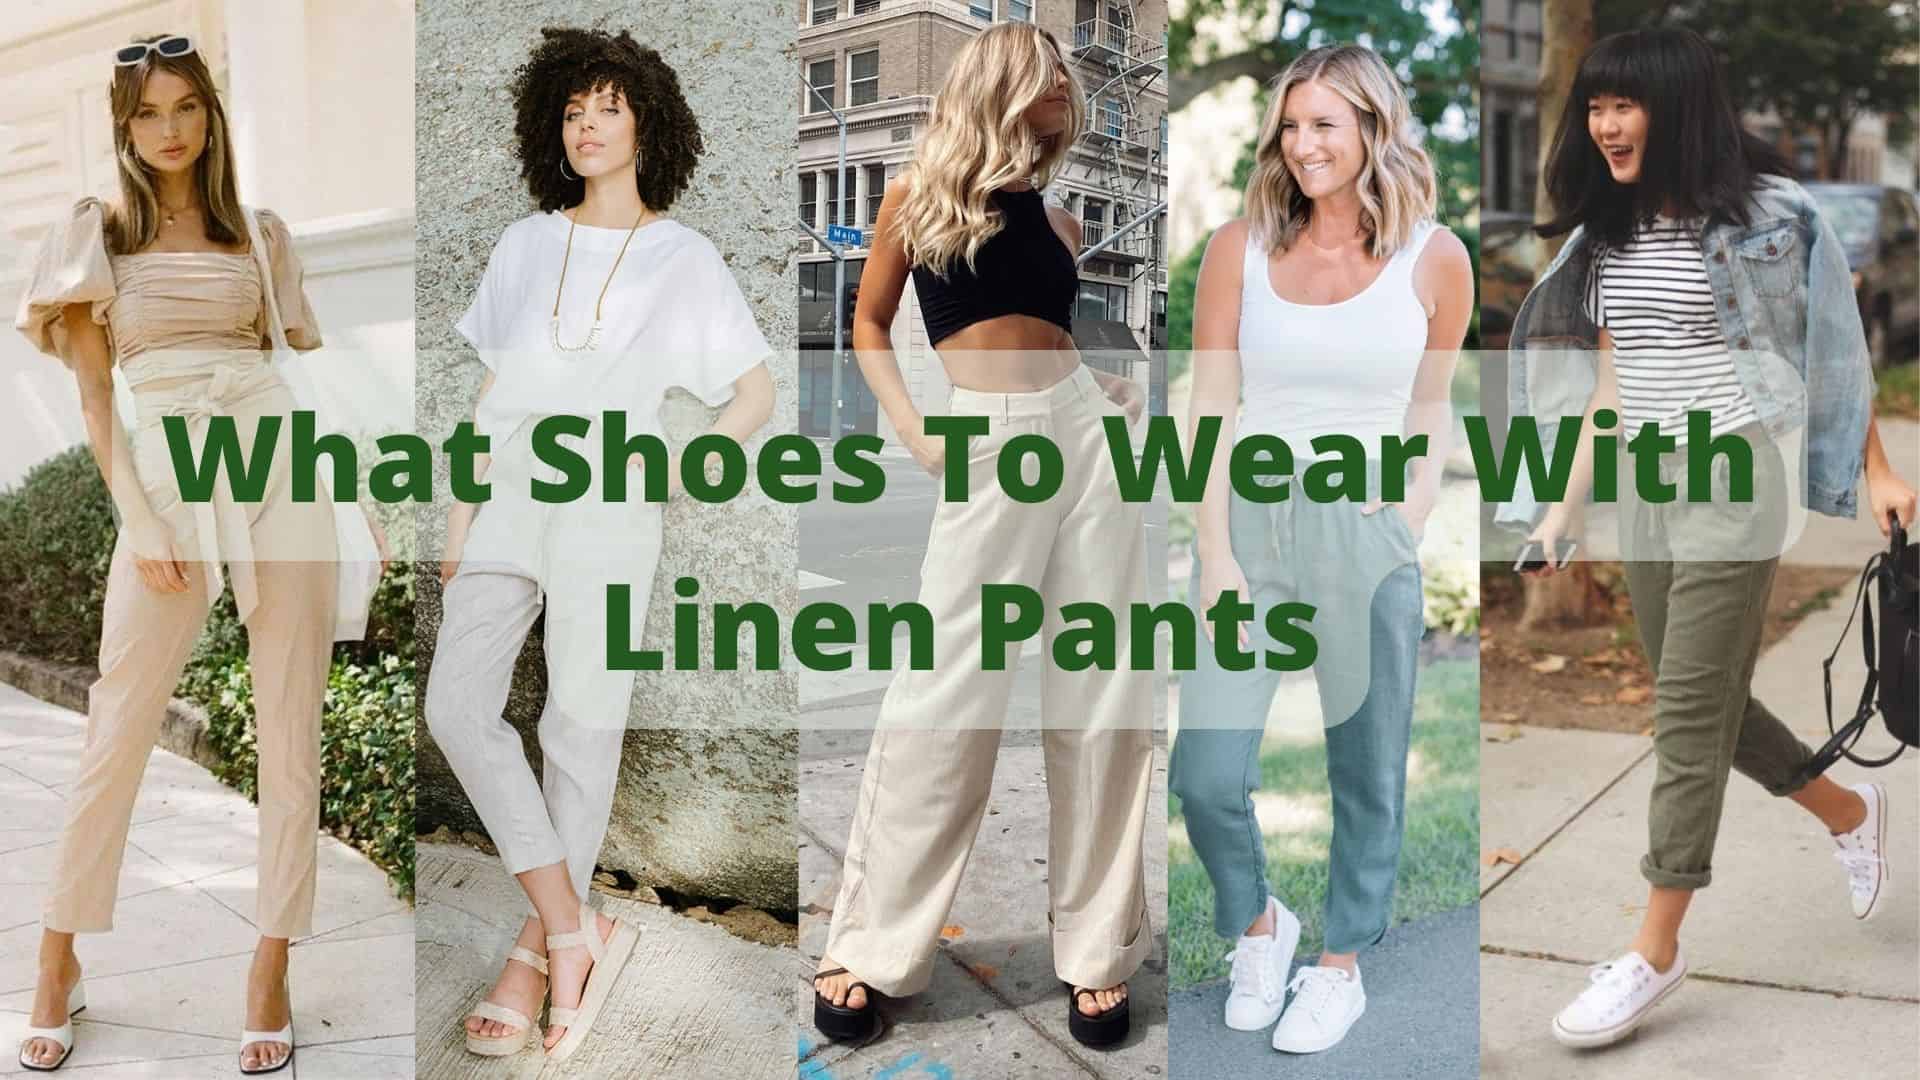 What Shoes to Wear with Linen Pants